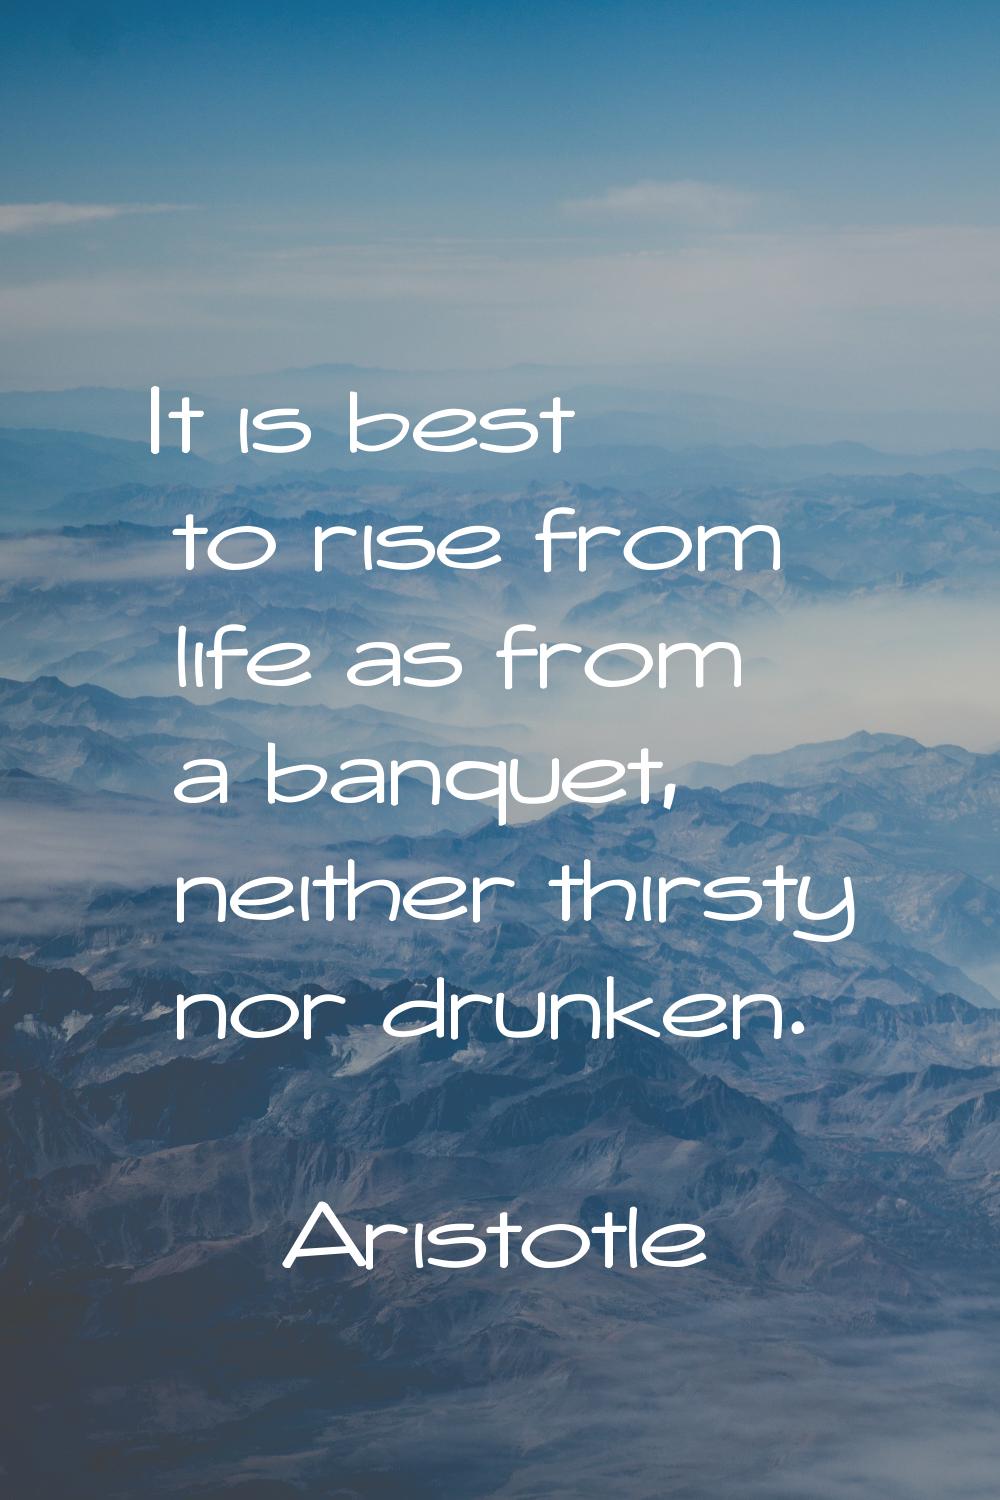 It is best to rise from life as from a banquet, neither thirsty nor drunken.